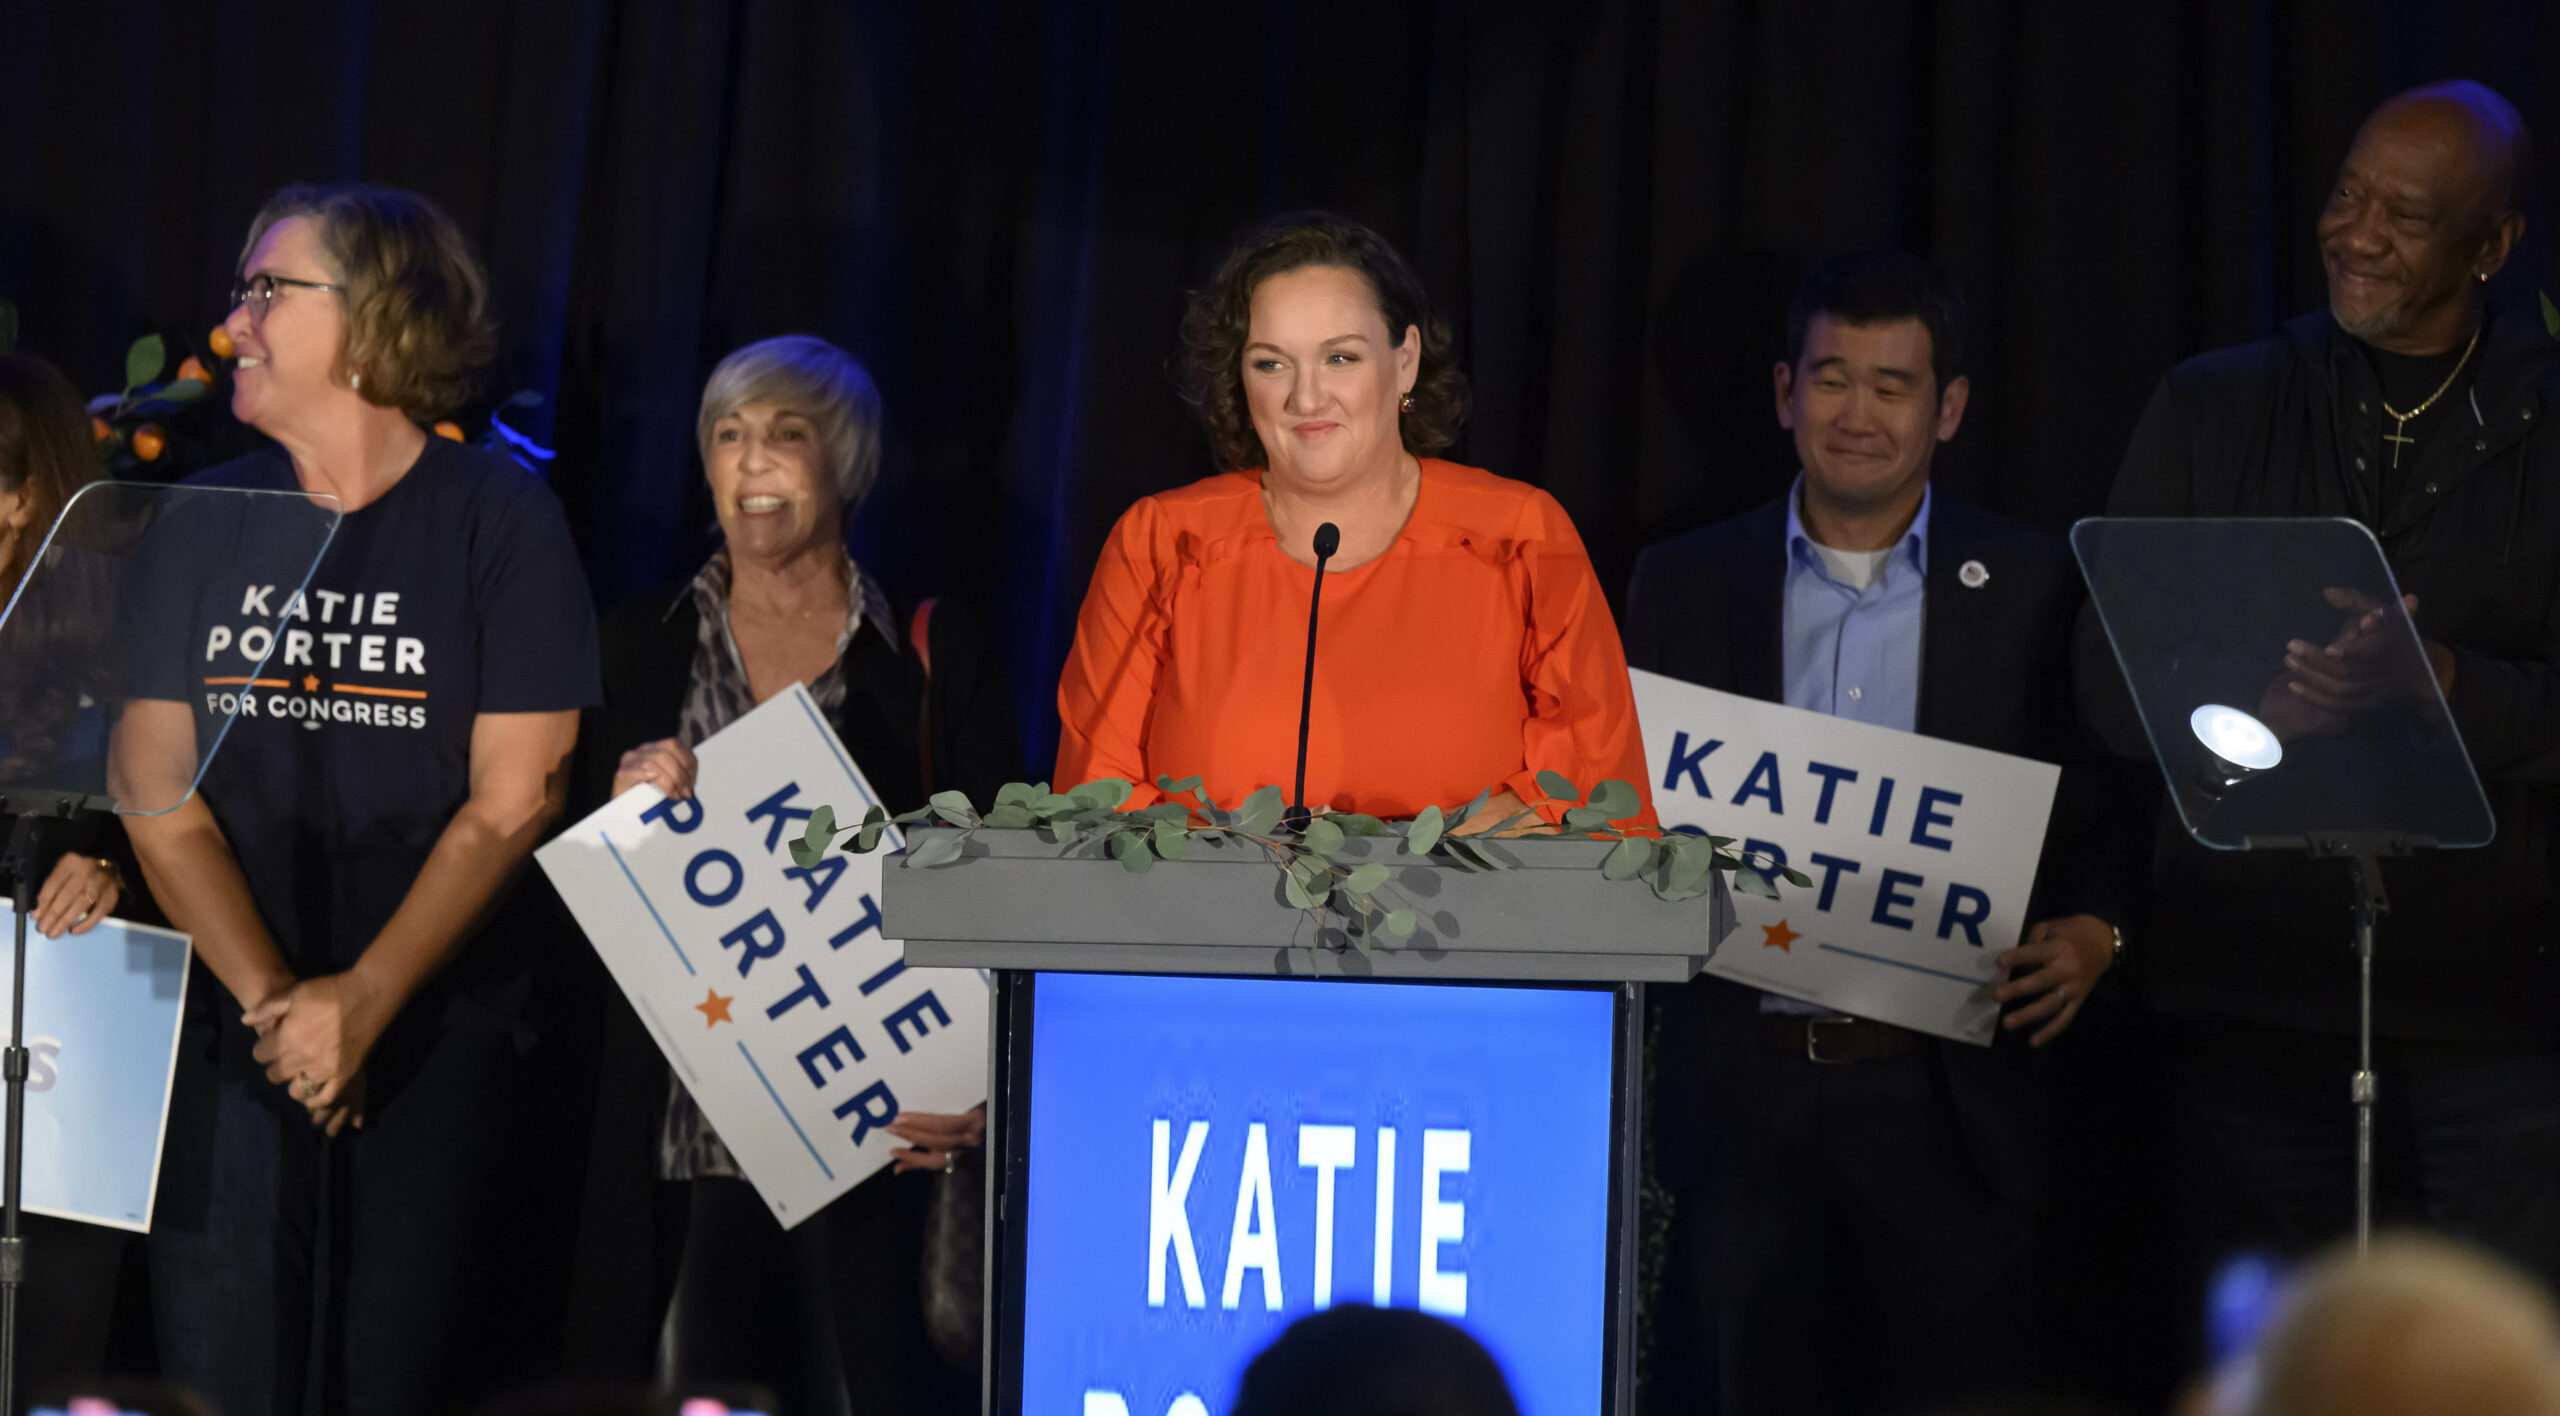 Rep. Katie Porter attends an election night watch party in Costa Mesa on Tuesday, November 8, 2022.